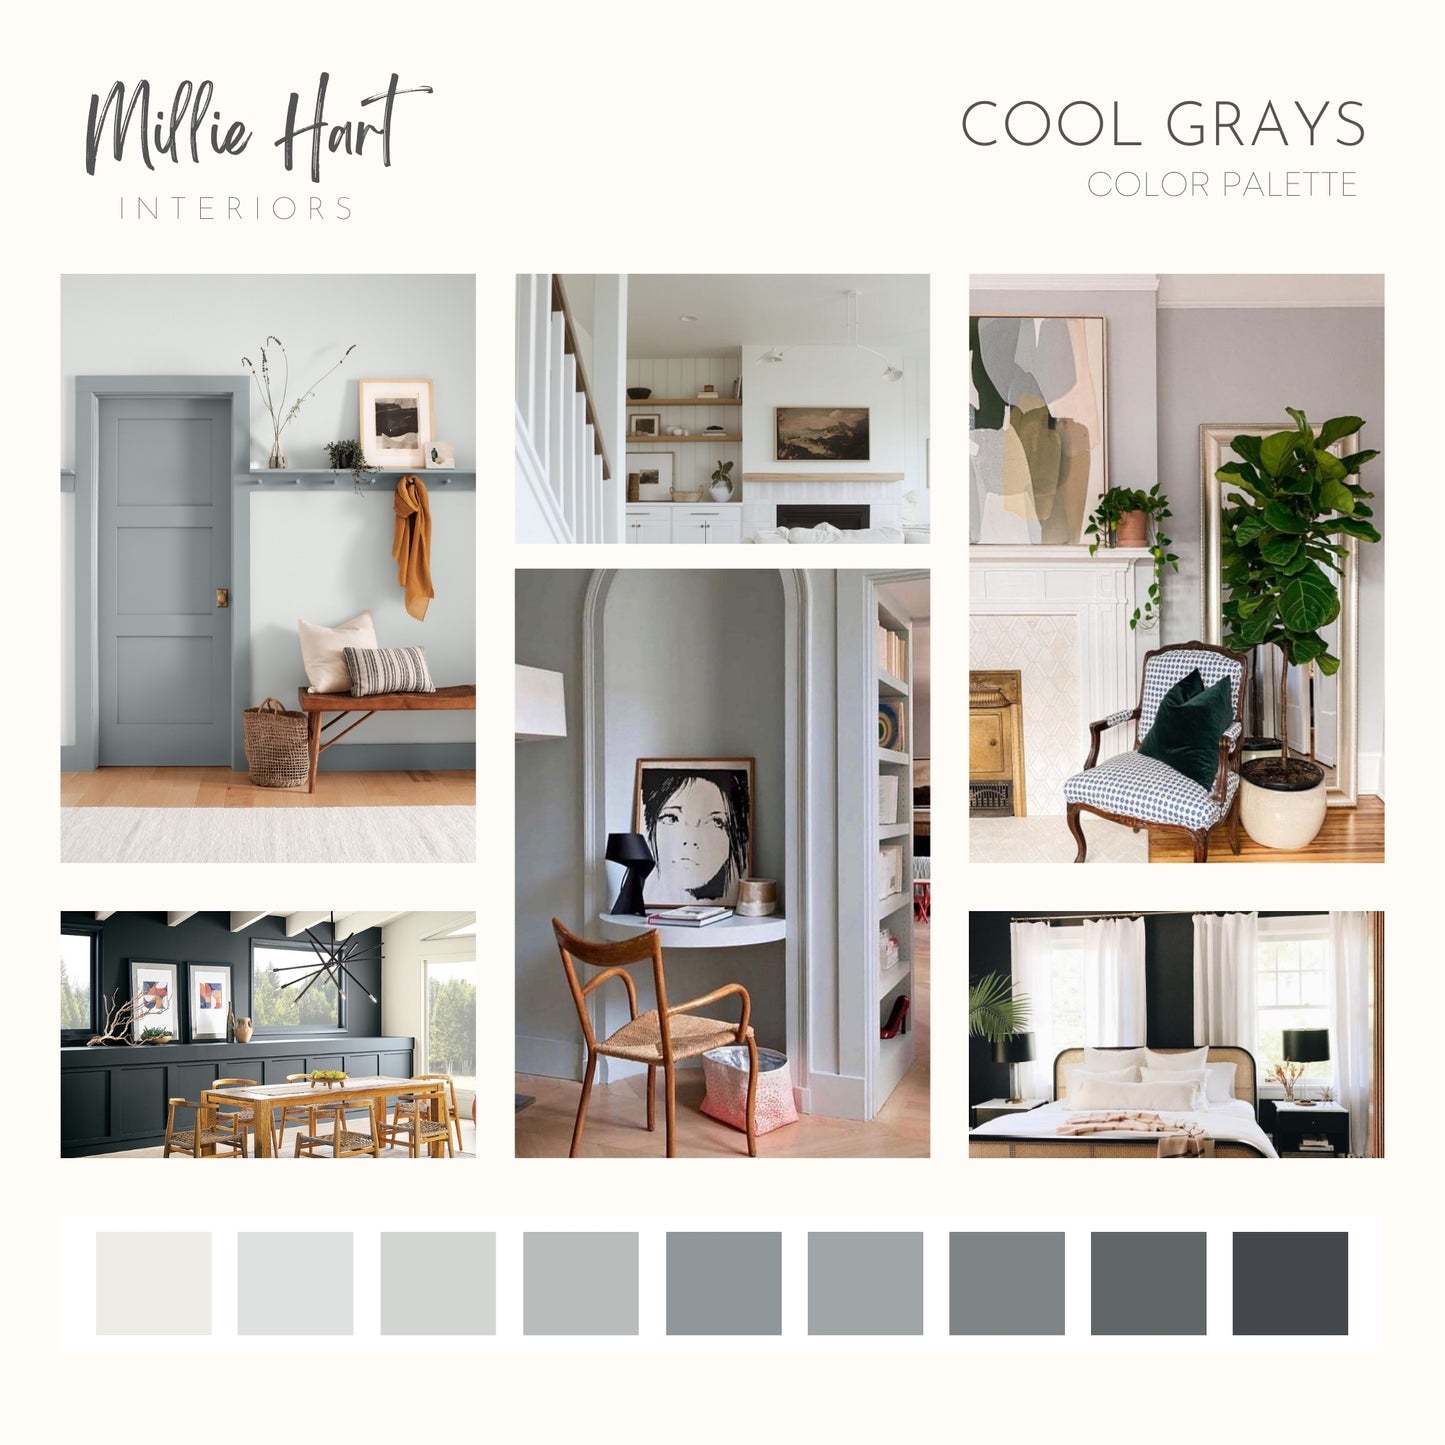 Cool Grays Sherwin Williams Paint Palette, Interior Paint Colors for Home, Cool Grays, Coastal Colors, Modern Neutrals, Pure White